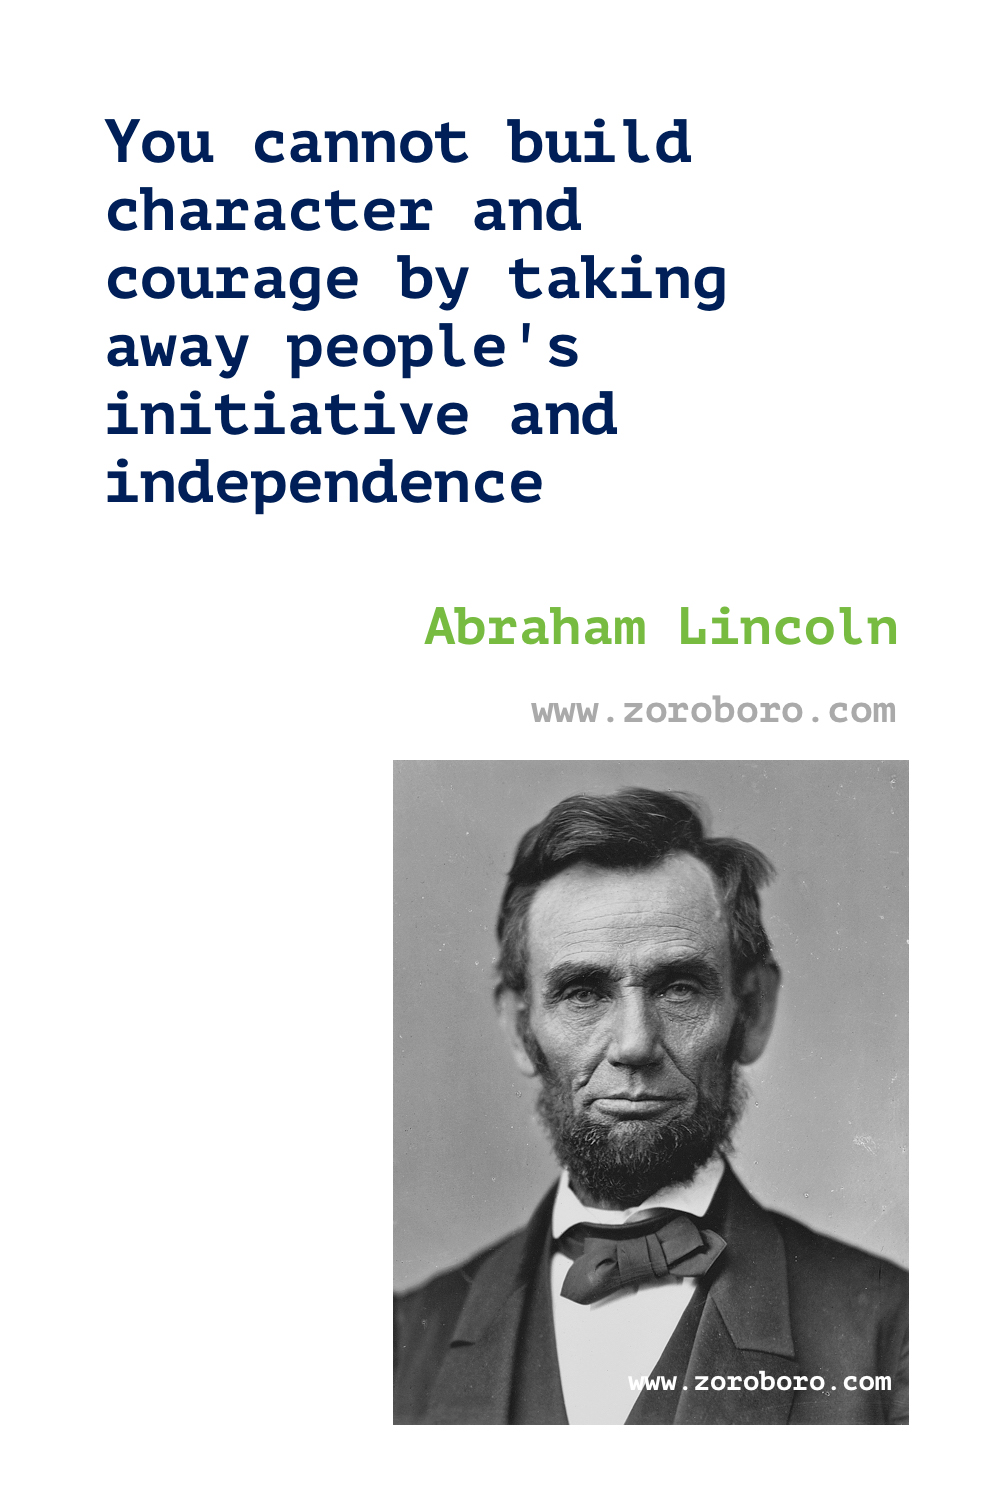 Abraham Lincoln Quotes. Abraham Lincoln Freedom Quotes, Life Quotes, Hope Quotes, & Democracy Quotes. Abraham Lincoln Inspirational Quotes. Abraham Lincoln Books Quotes